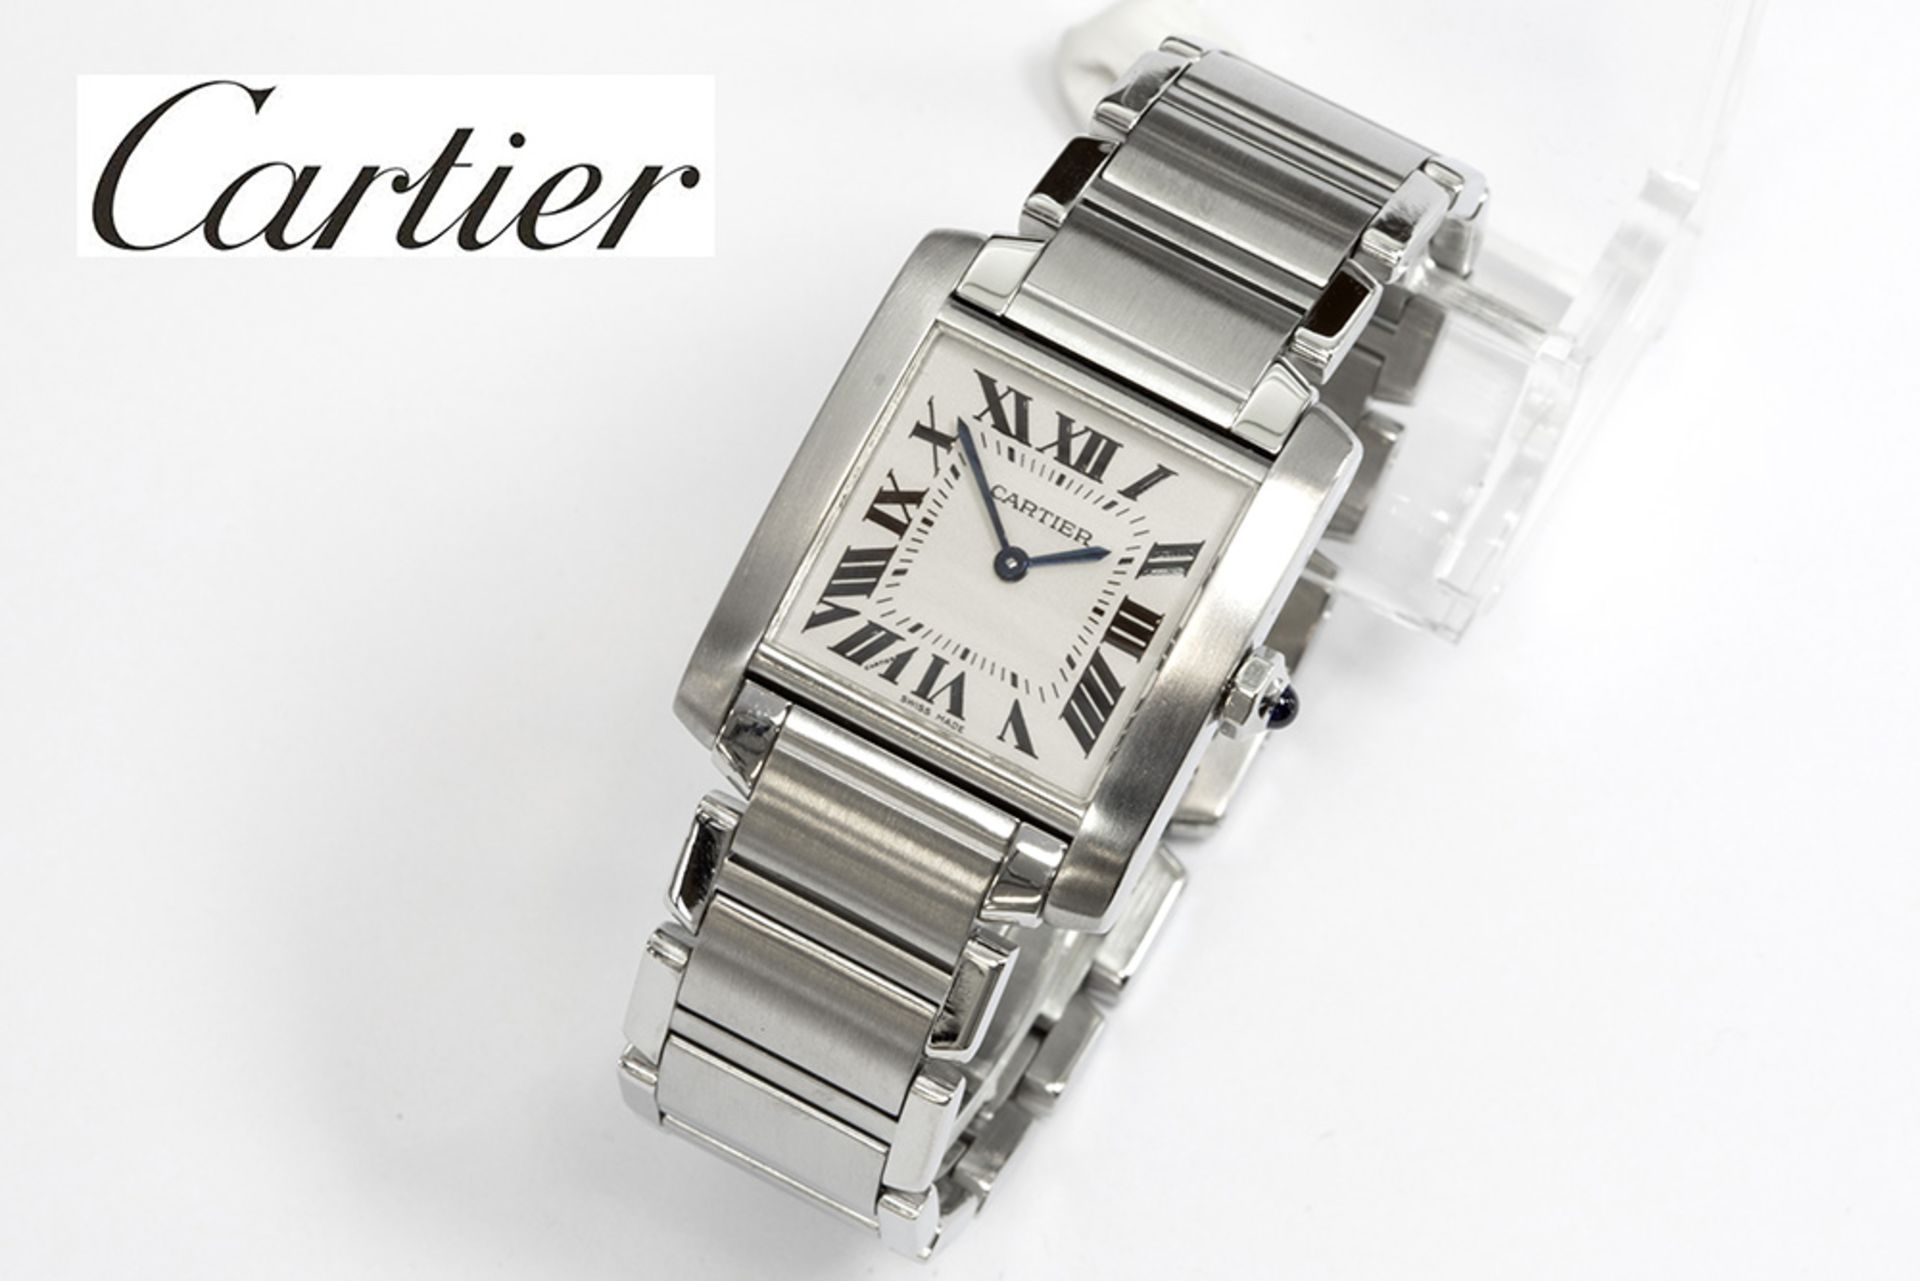 completely original Cartier marked quartz "Tank française" wristwatch in steel - with its papers and